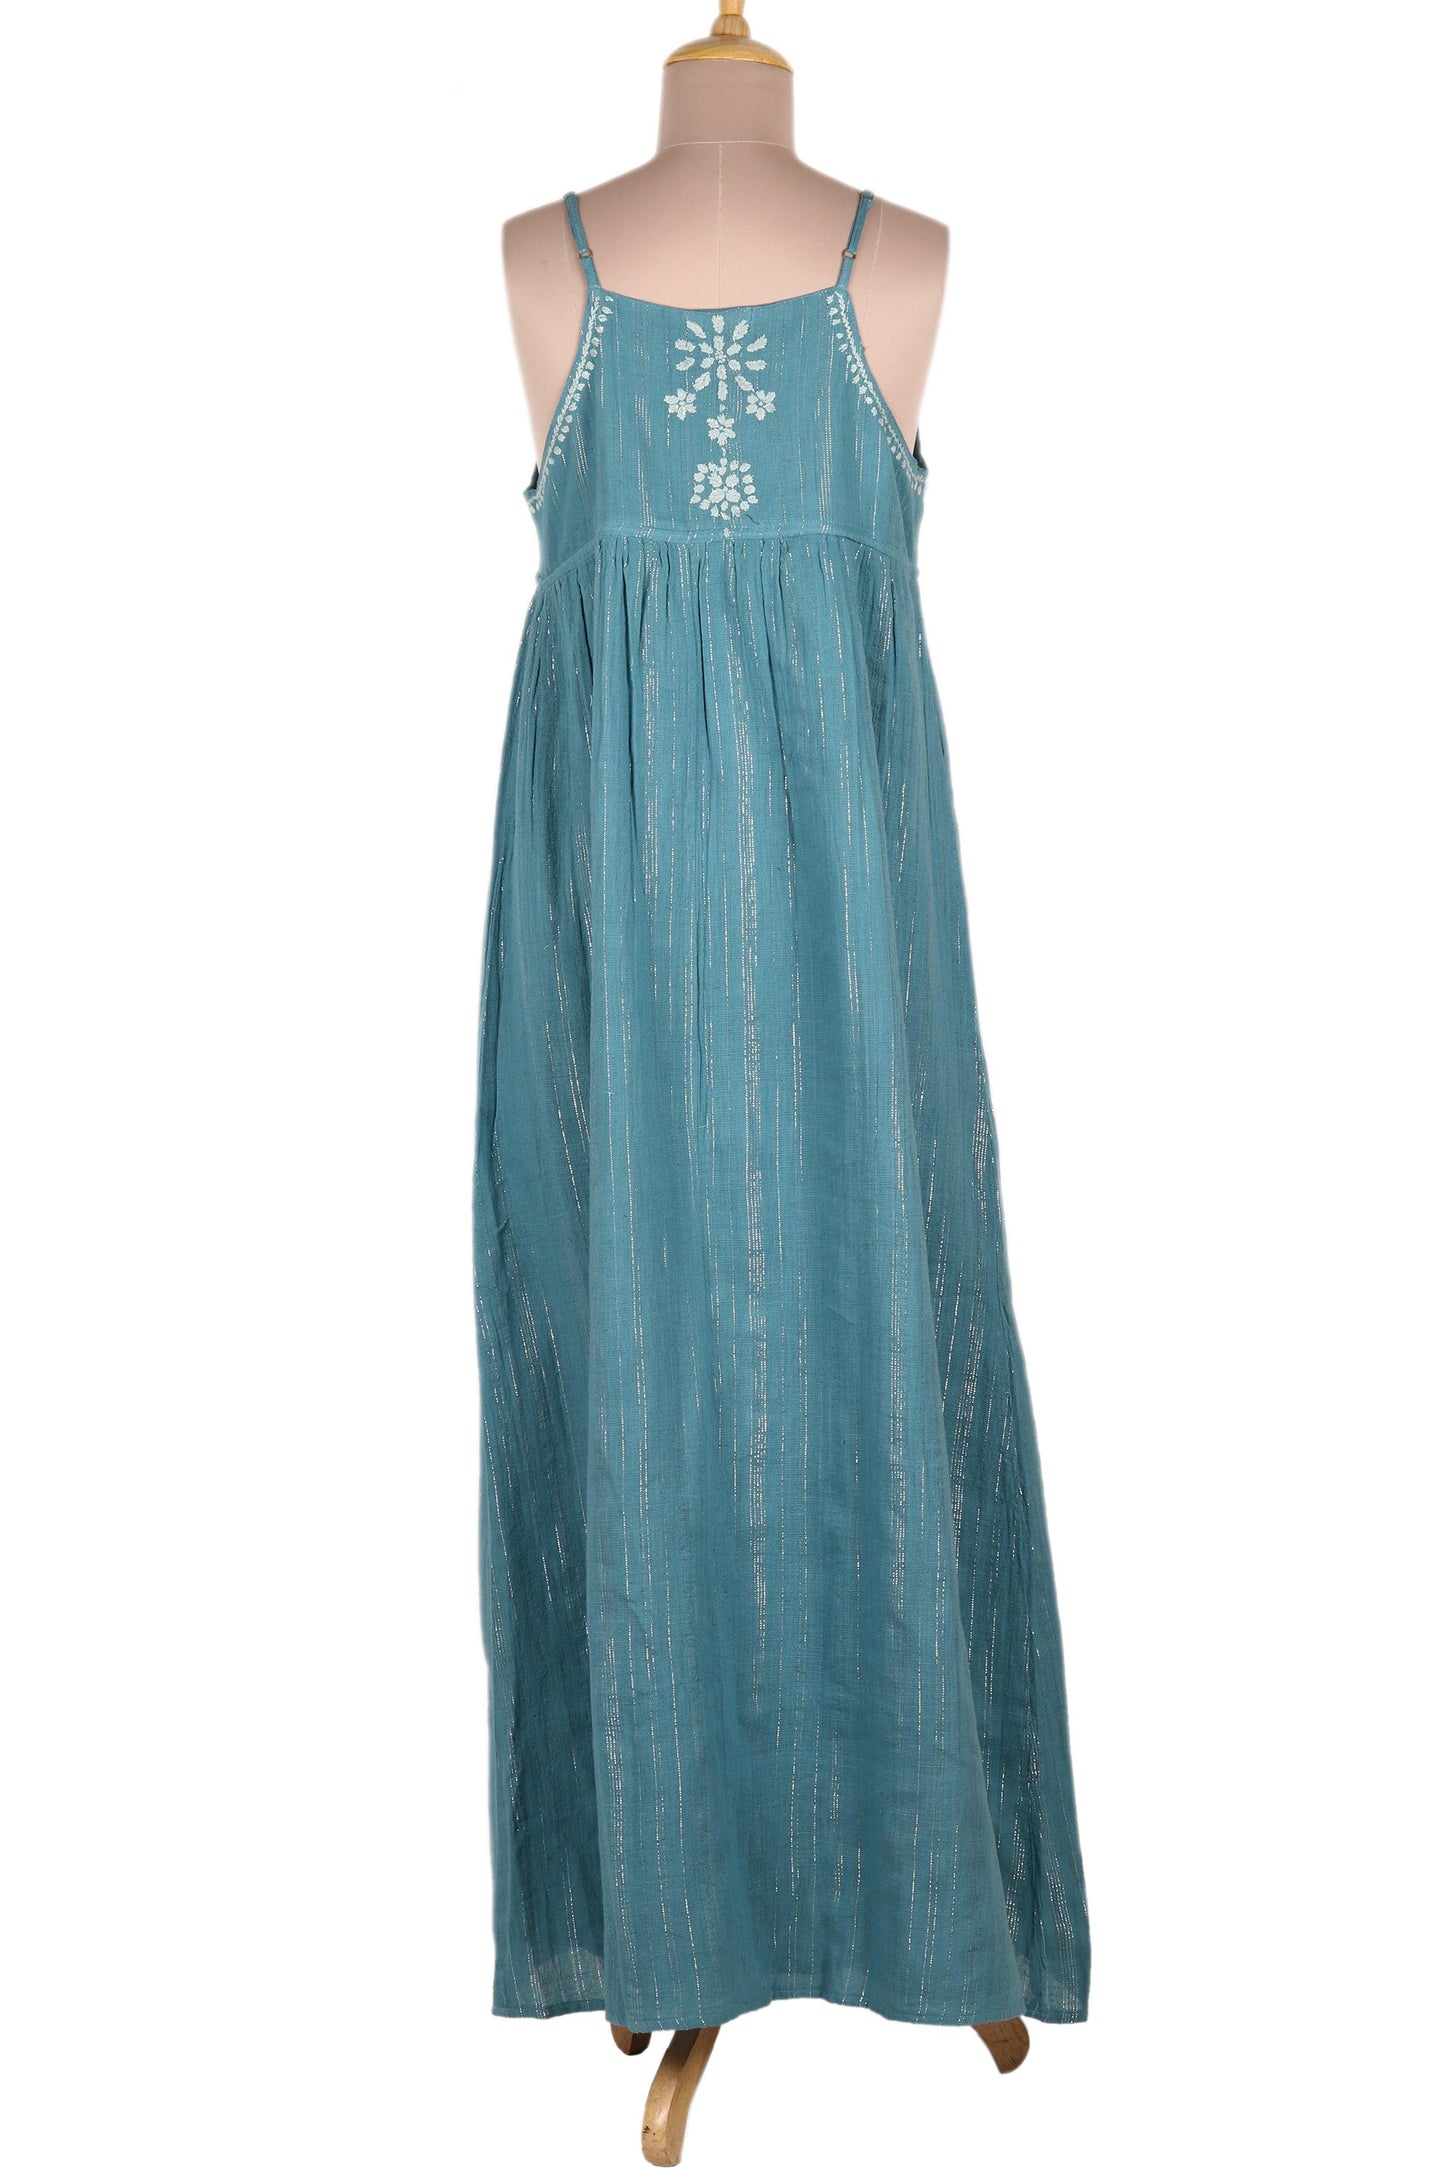 Seaside Flowers Embroidered Teal Cotton Sundress from India